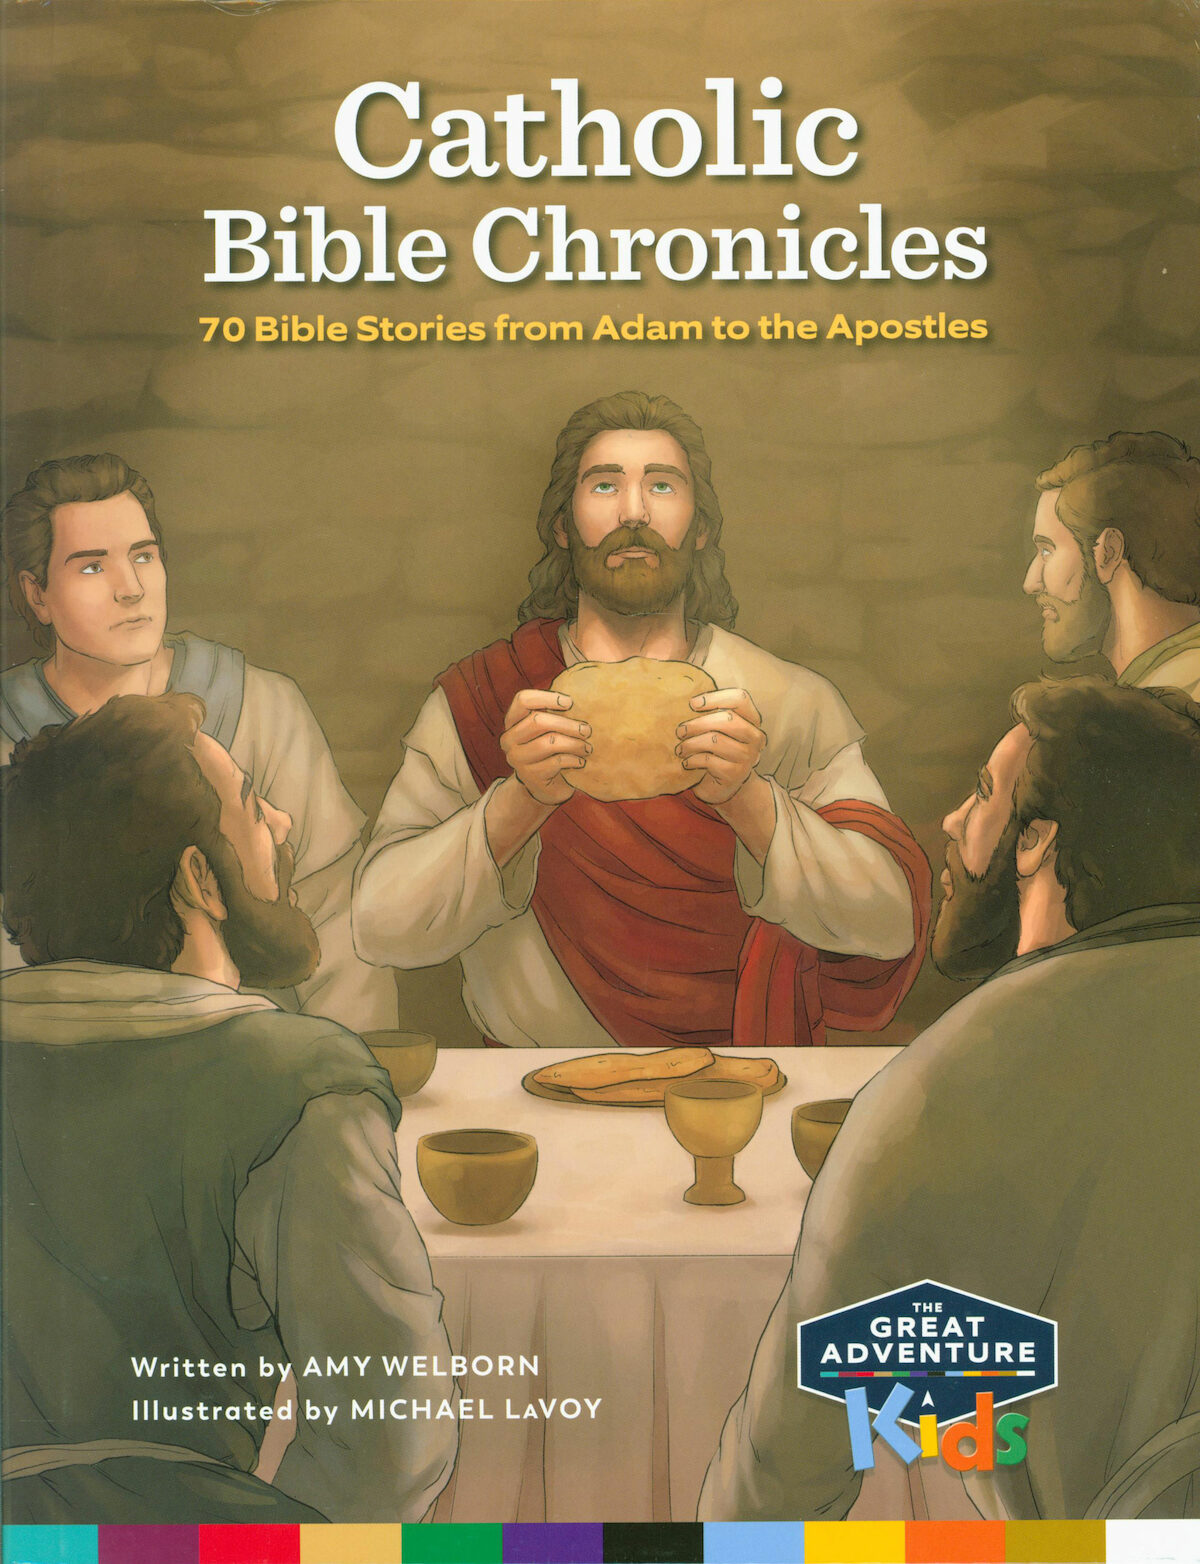 Great Adventure Kids Catholic Bible Chronicles — Ascension Comcente